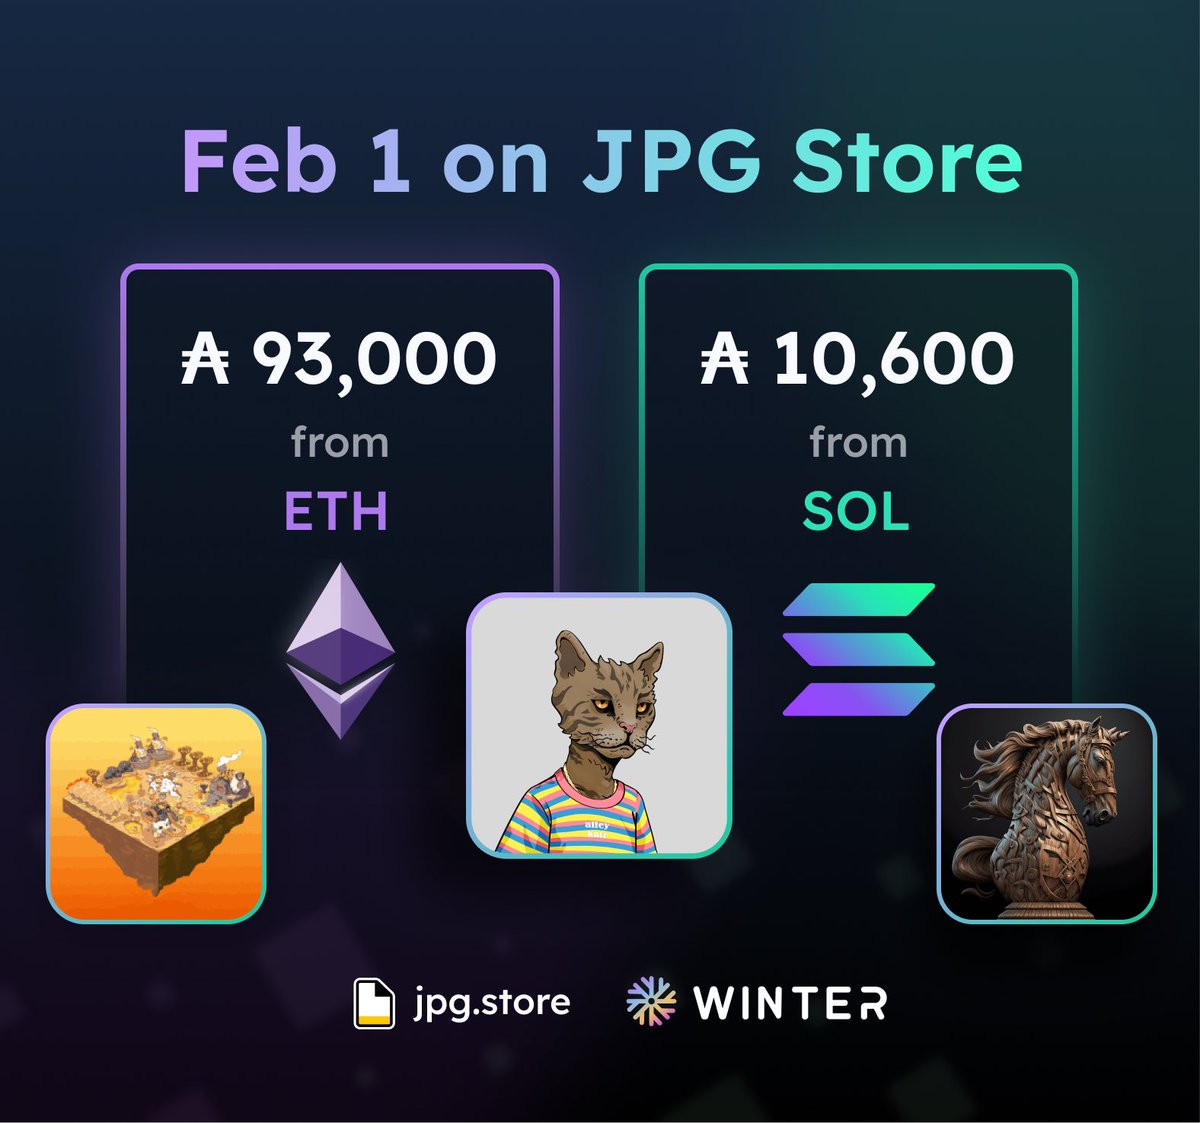 You asked for it, so here’s some data on ETH and SOL purchases on Feb 1st 💛 Huge shoutout to every project focusing on cross chain appeal and bridging over users from other chains 🔨